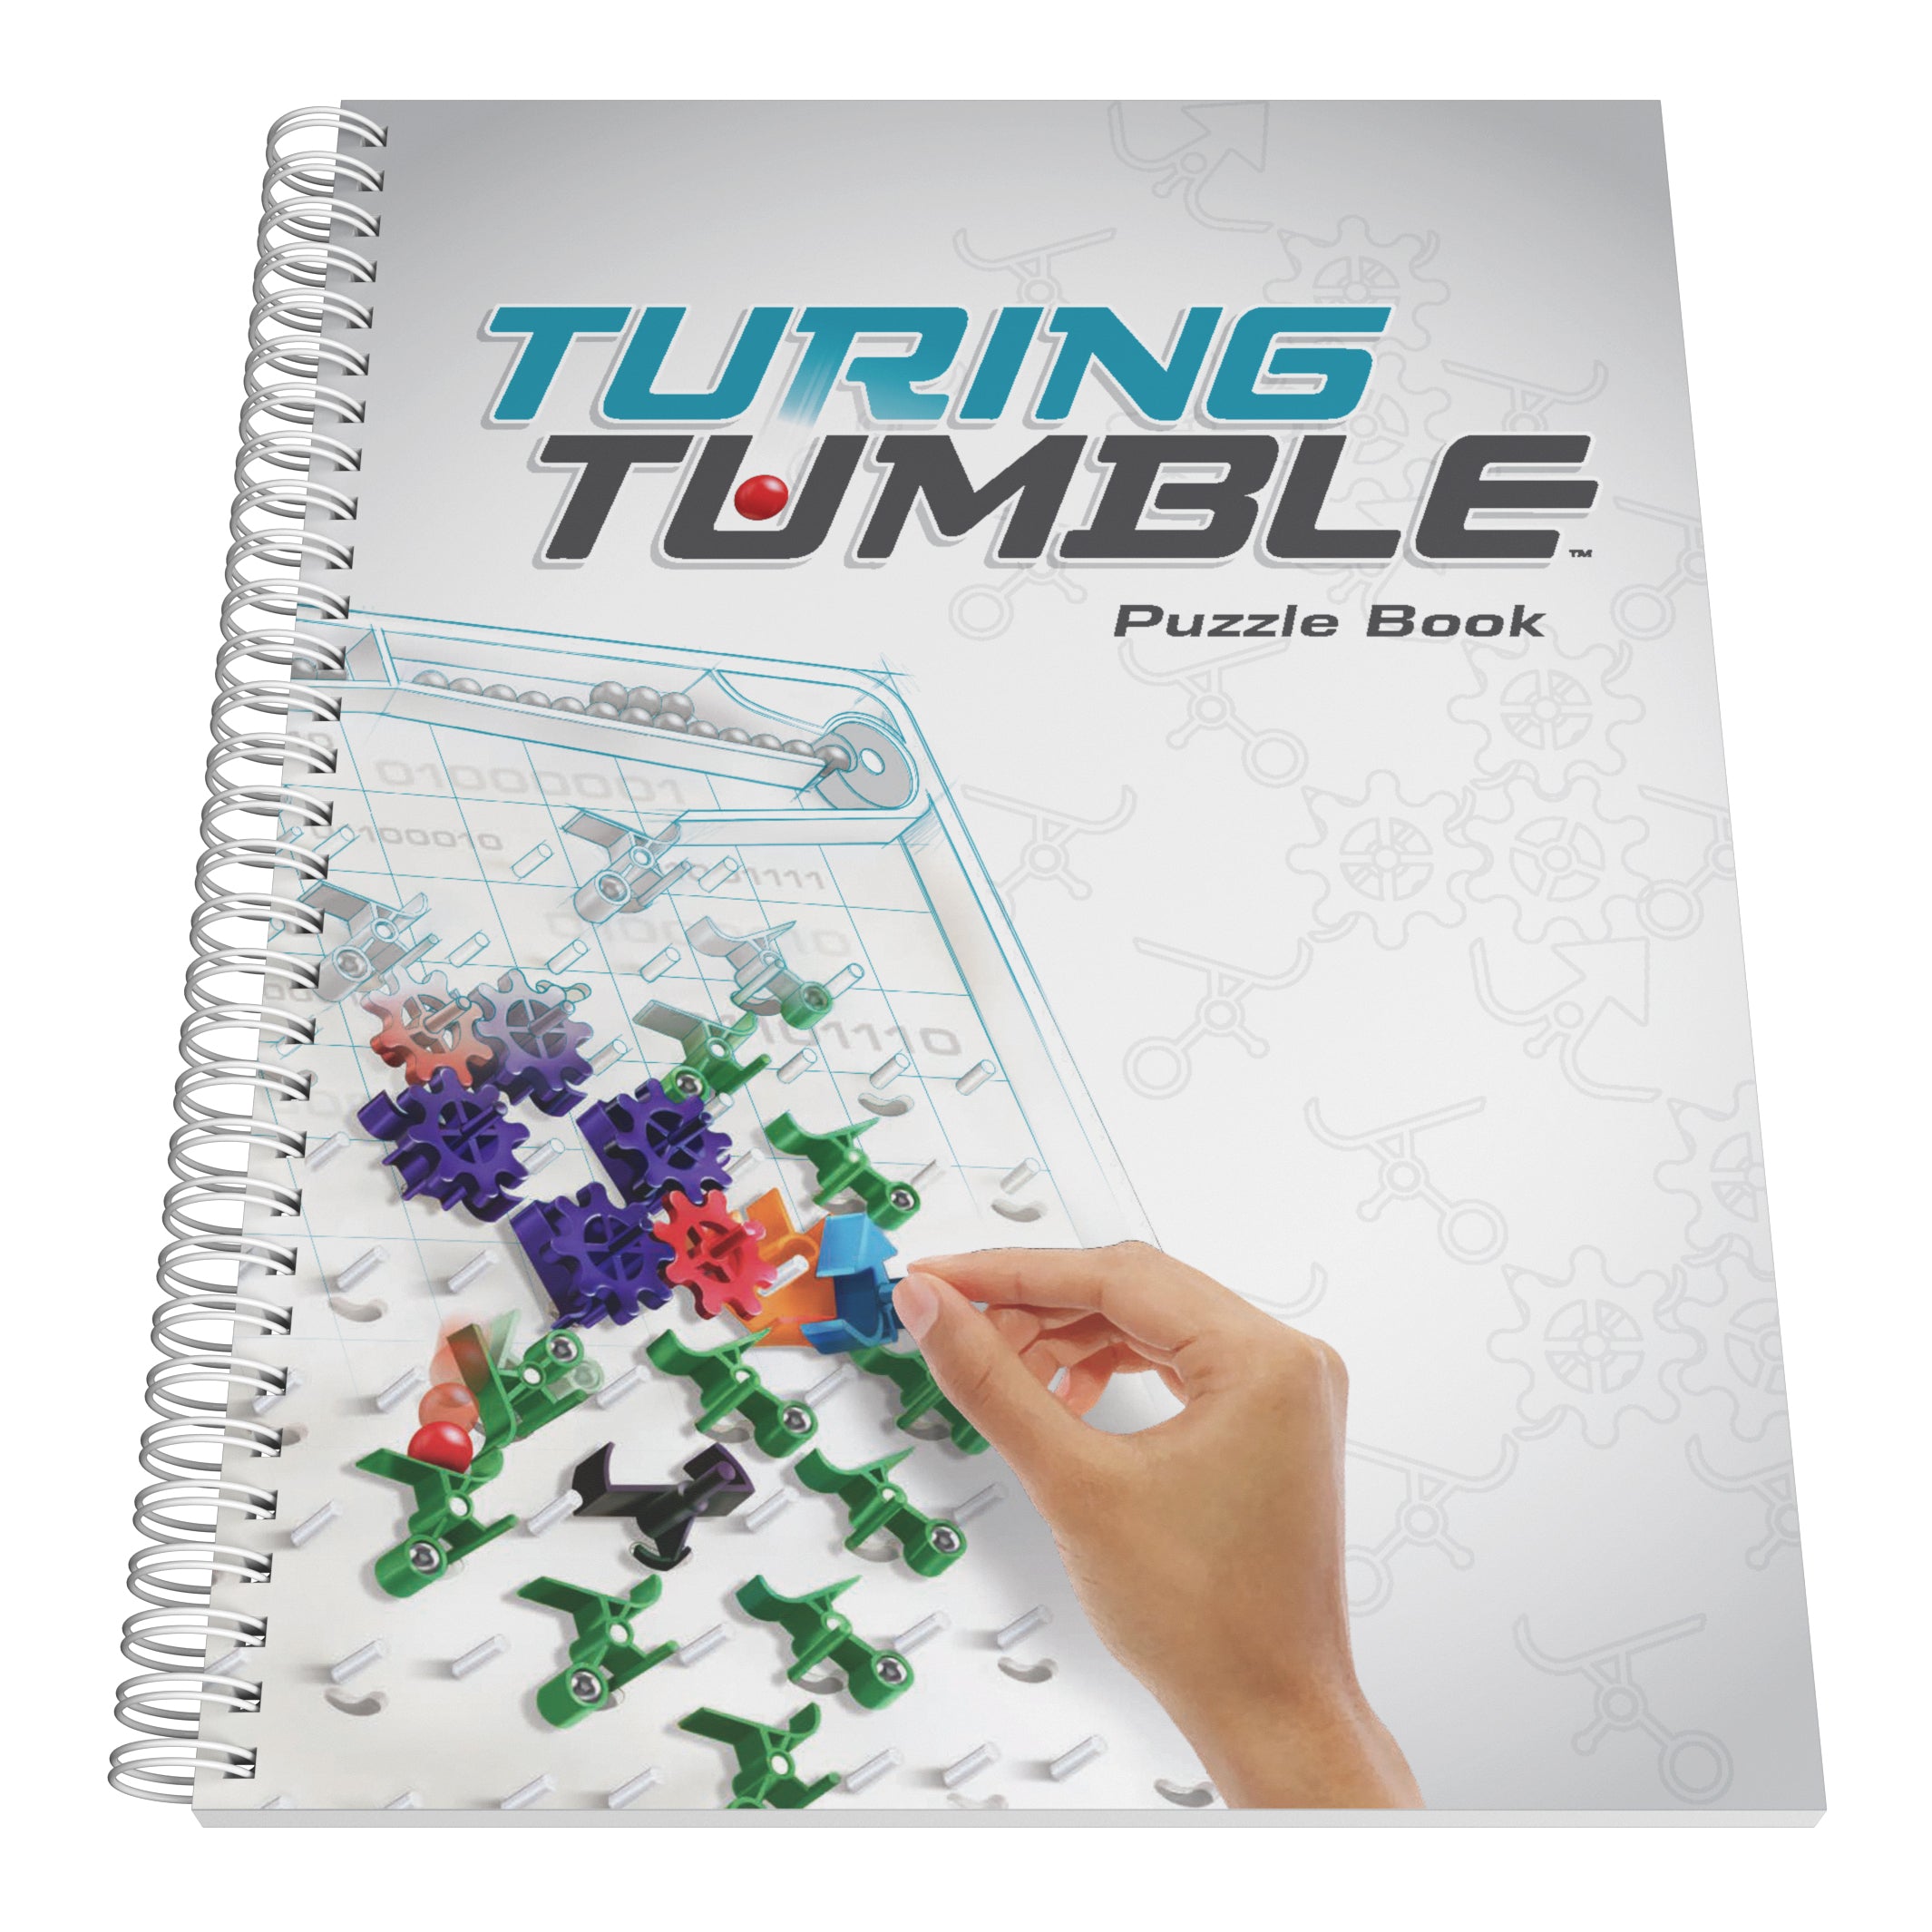 Upper Story - Back when I created Turing Tumble, I was a